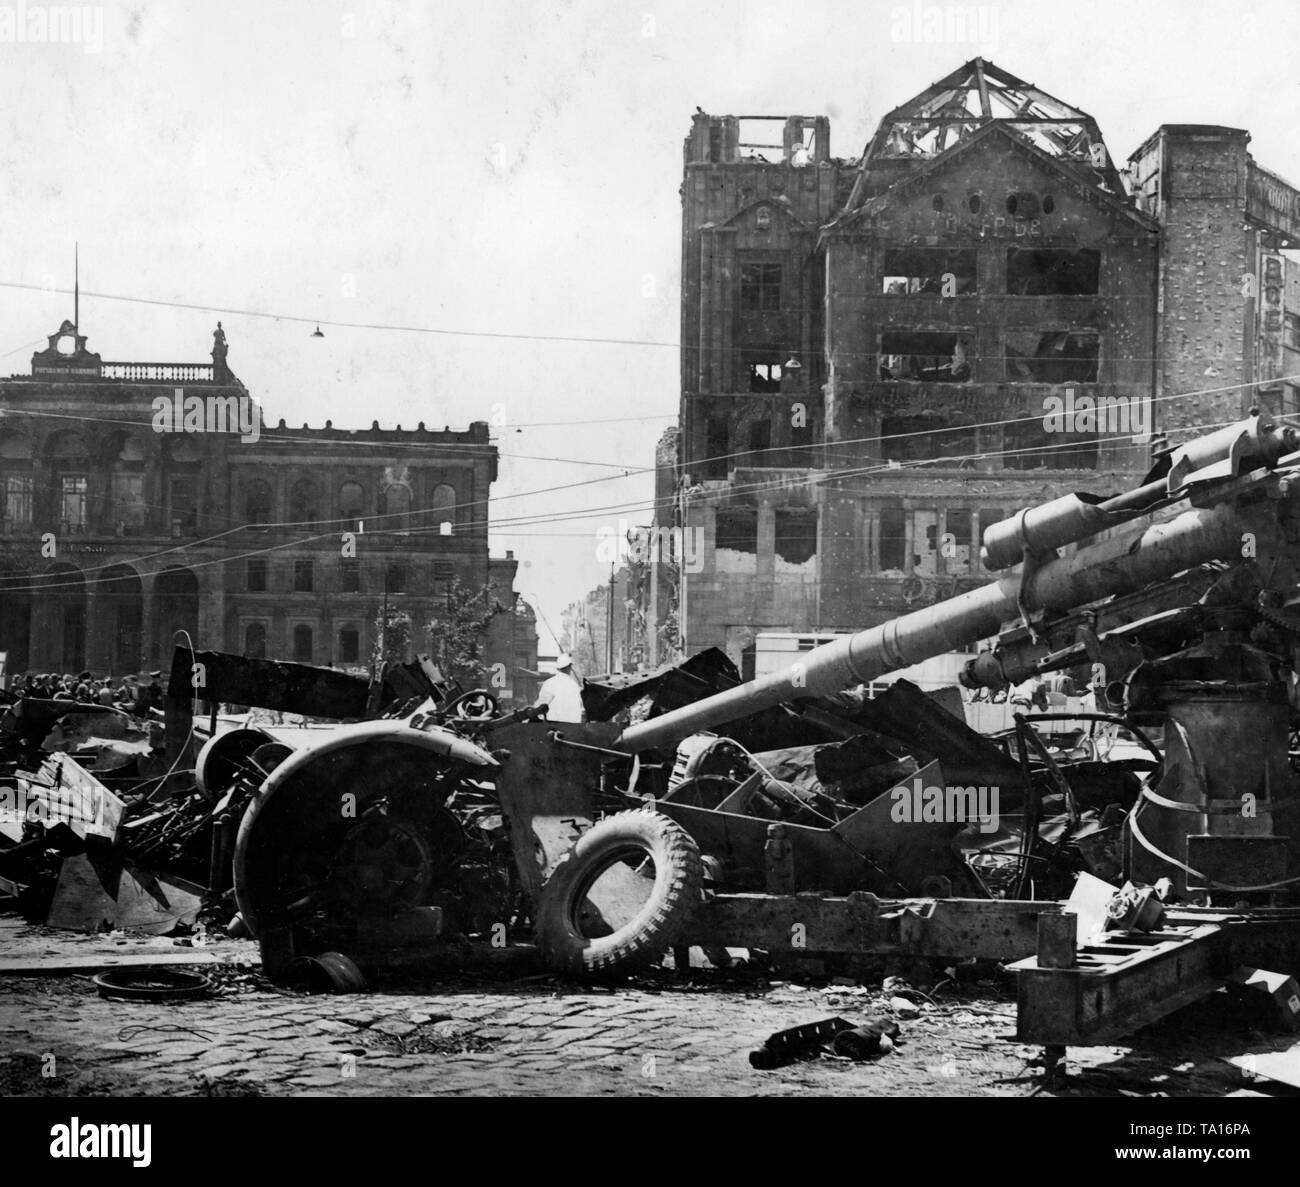 The Potsdamer Platz in Berlin after the capture of the city by the Red Army. On the right, a destroyed 8.8 cm FlaK 18/36/37, which, until recently, was used in the fight against Soviet tanks. In the background a group of civilians in front of Russian road signs. Stock Photo